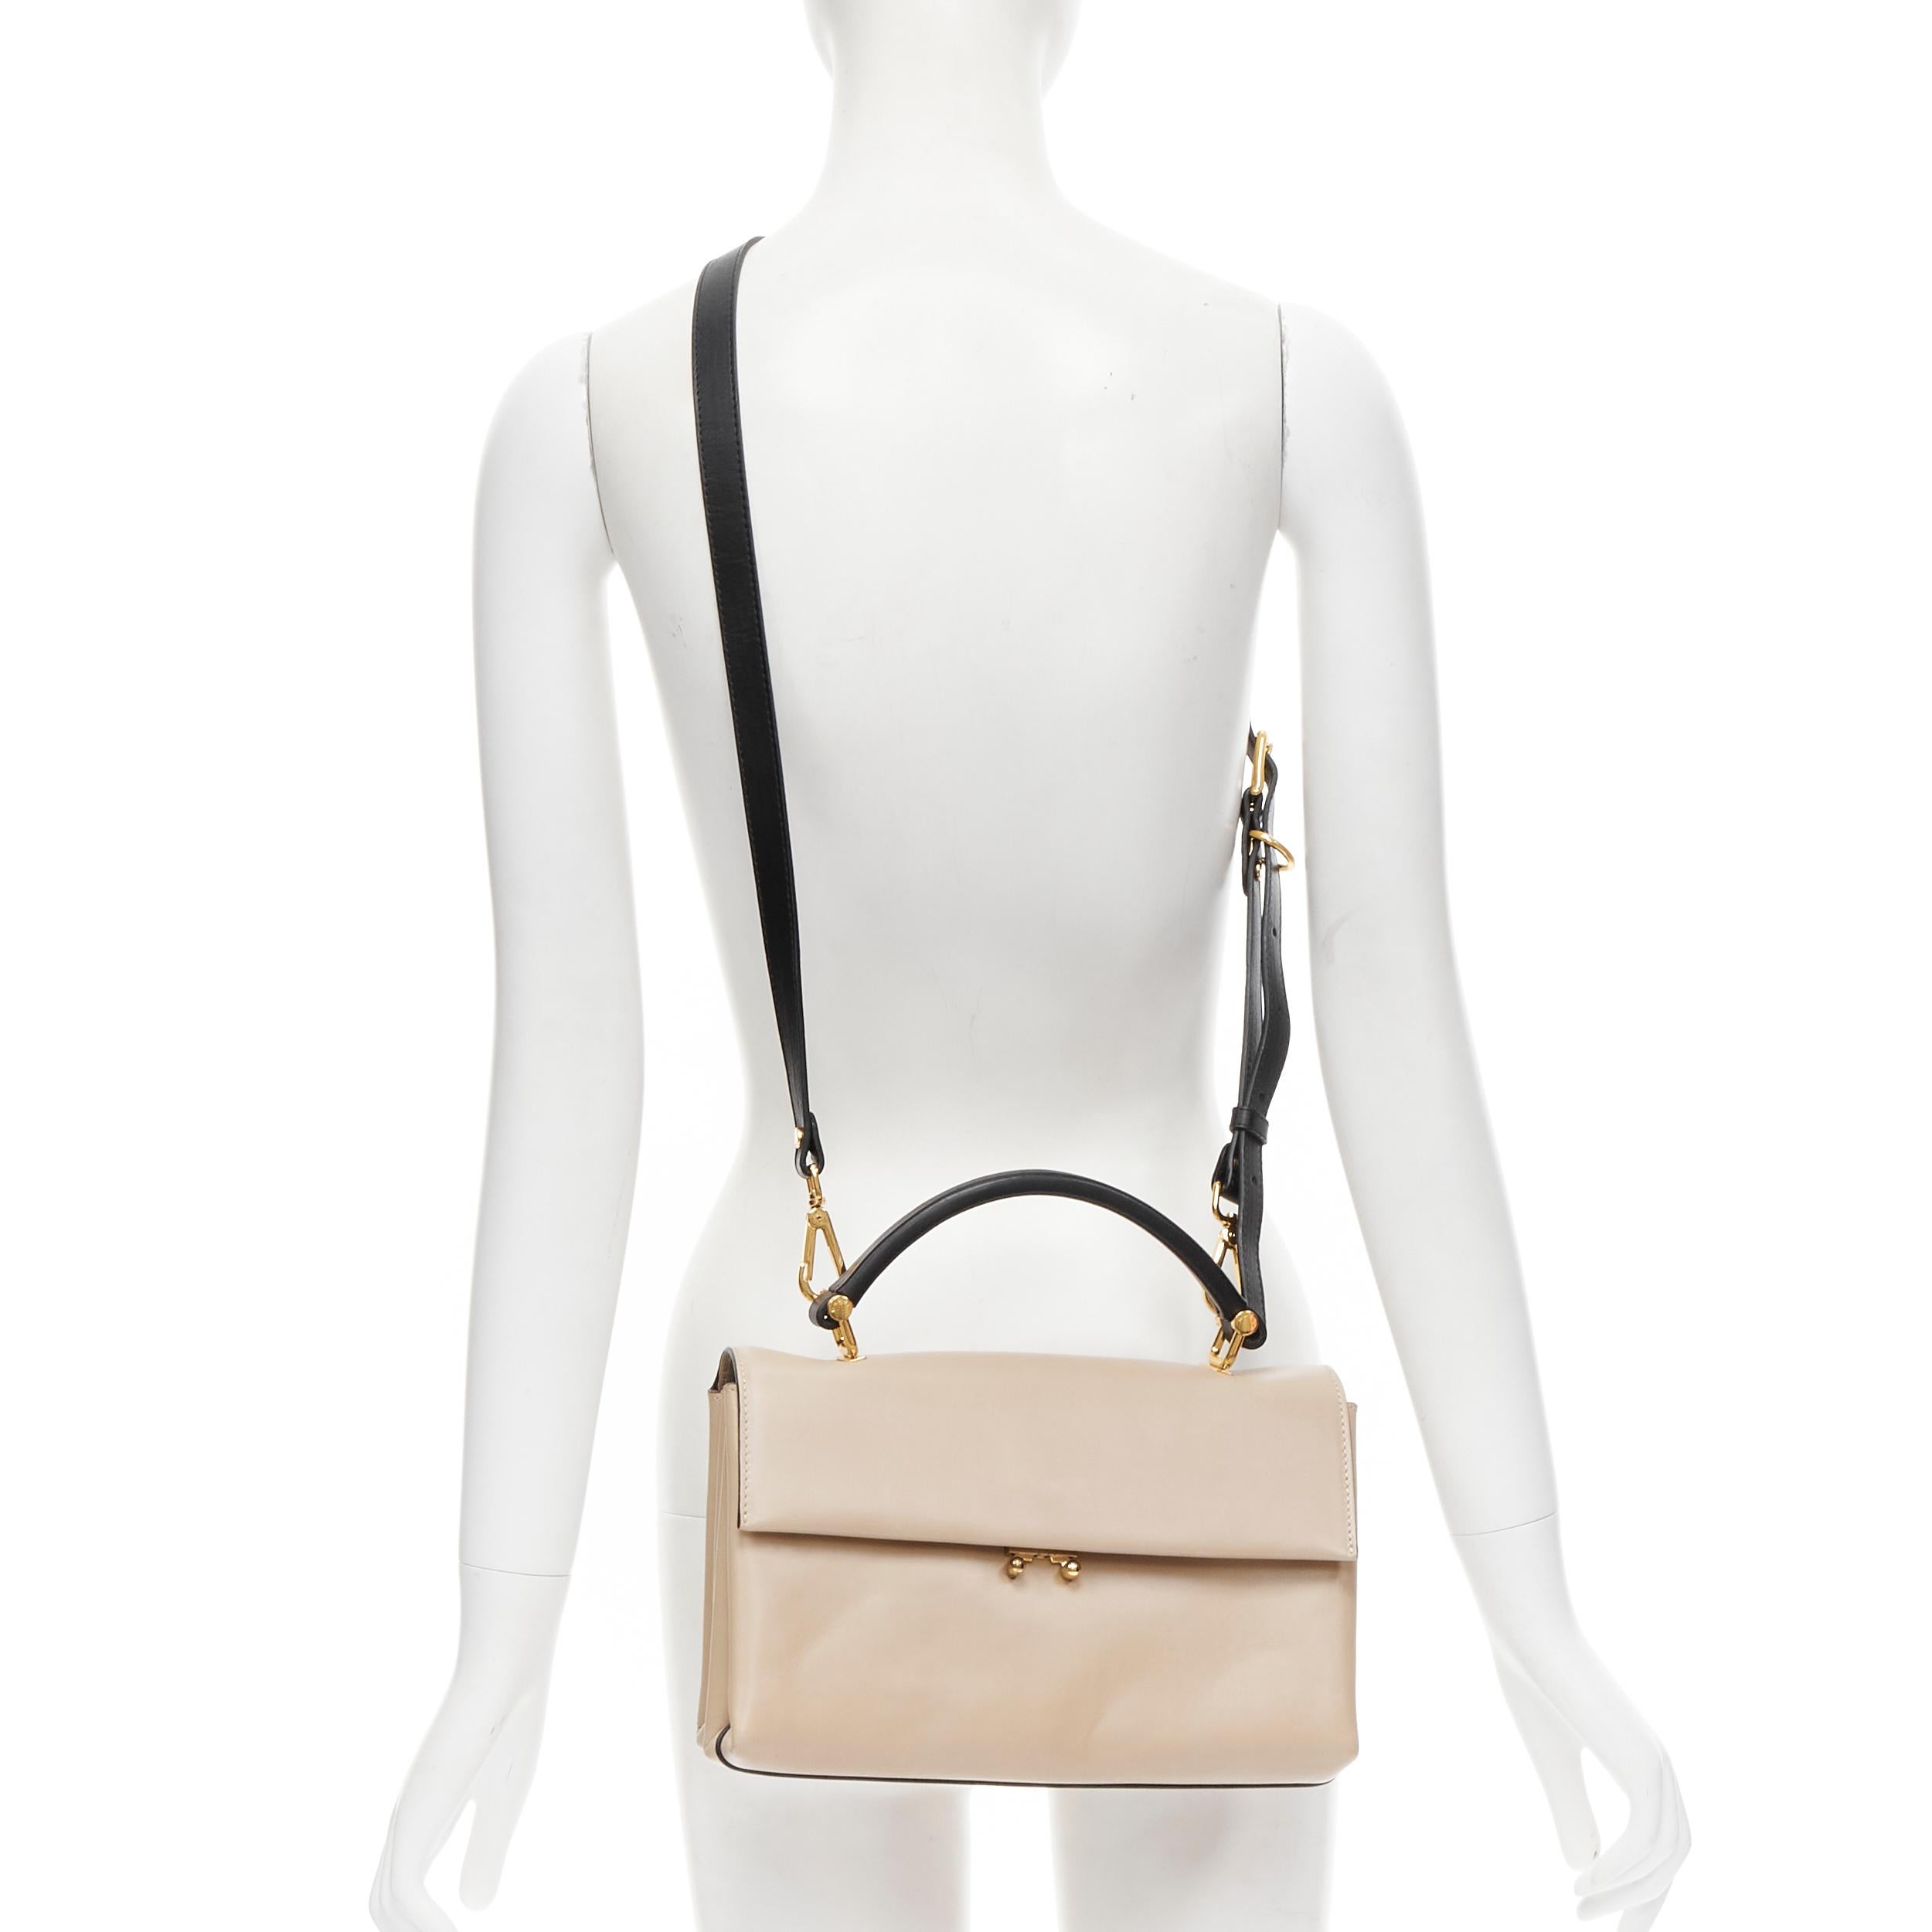 MARNI stone grey black clasp lock flap top handle crossbody satchel bag 
Reference: CELG/A00028 
Brand: Marni 
Model: Clasp lock top handle crossbody 
Material: Leather 
Color: Grey 
Pattern: Solid 
Closure: Lock 
Extra Detail: Gold tone push clasp